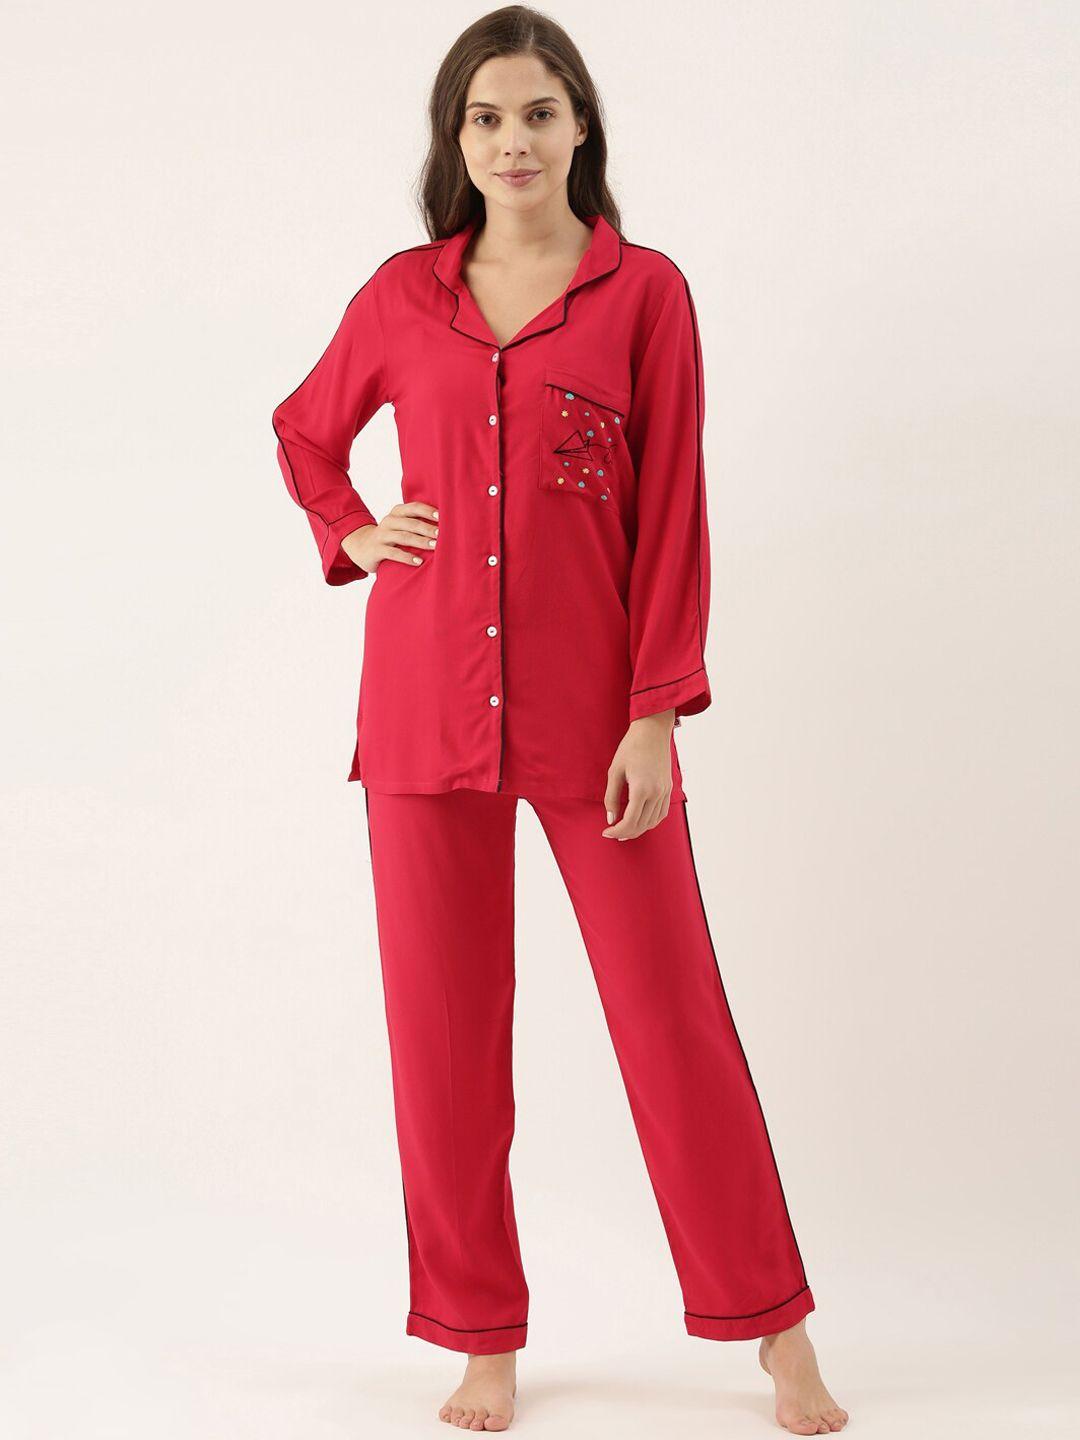 bannos swagger women red night suit